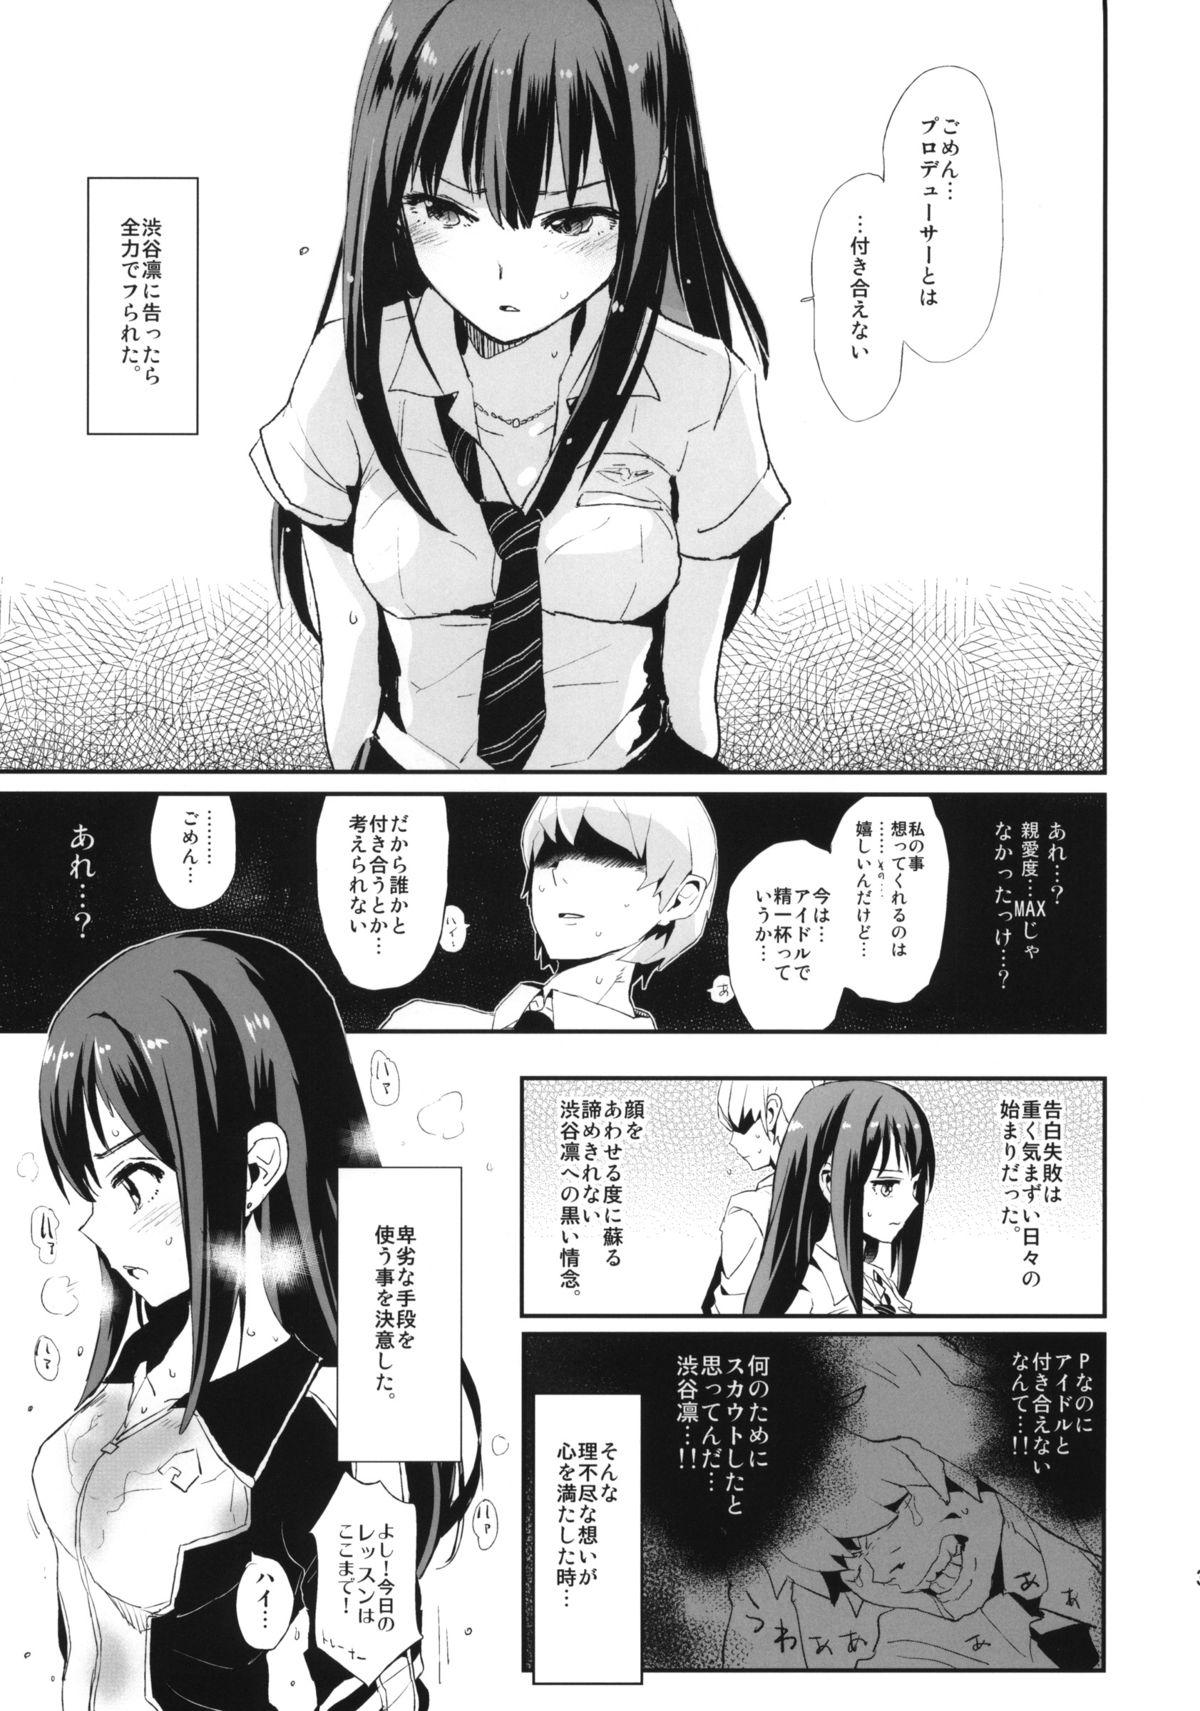 Atm SUIMINSHIBURIN + Paper - The idolmaster Piroca - Page 3